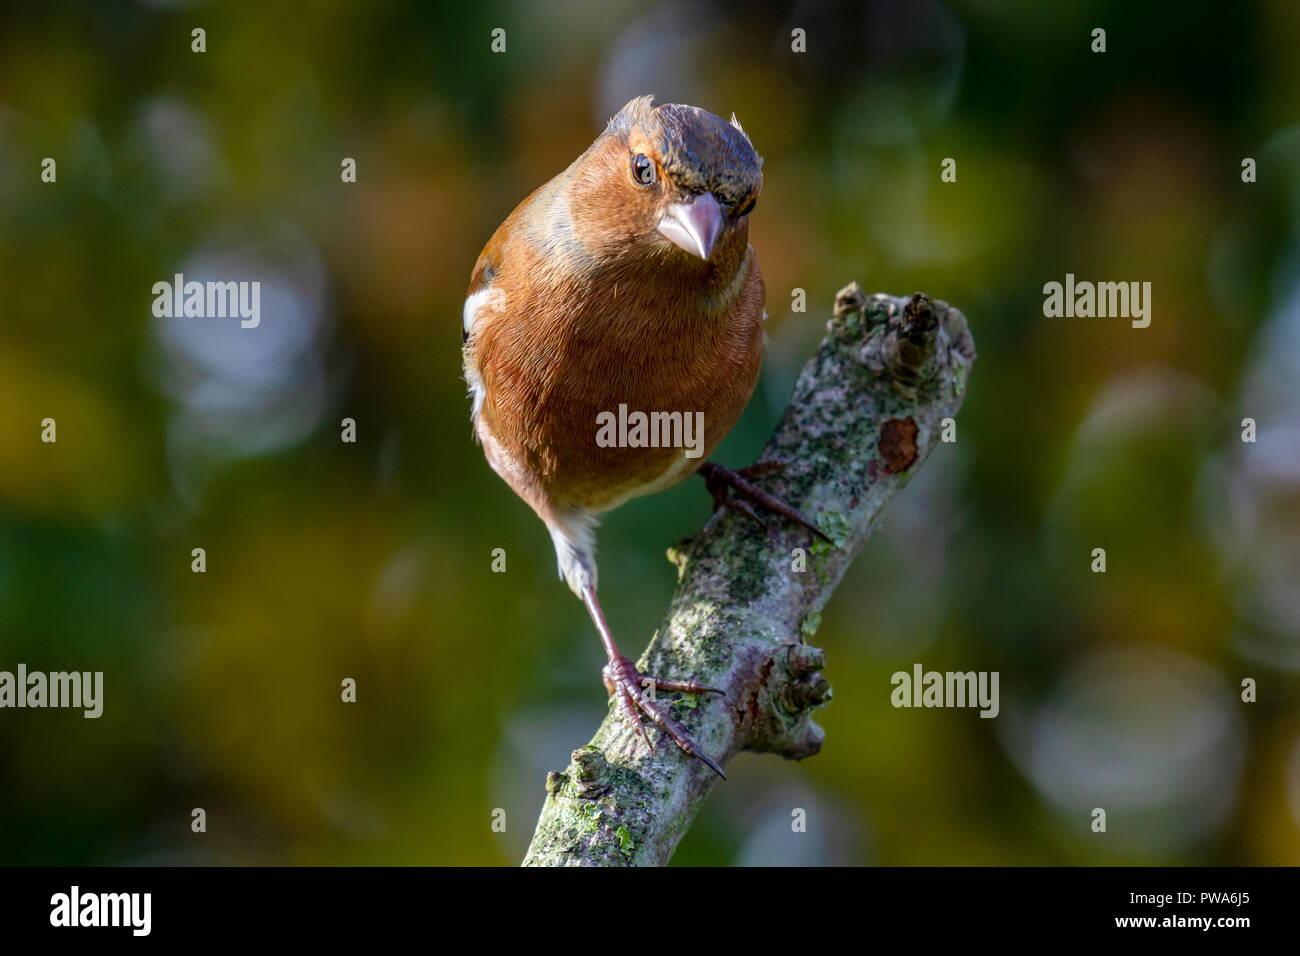 European Chaffinch (Fringilla coelebs) perched on branch looking at camera with autumn background, United Kingdom Stock Photo